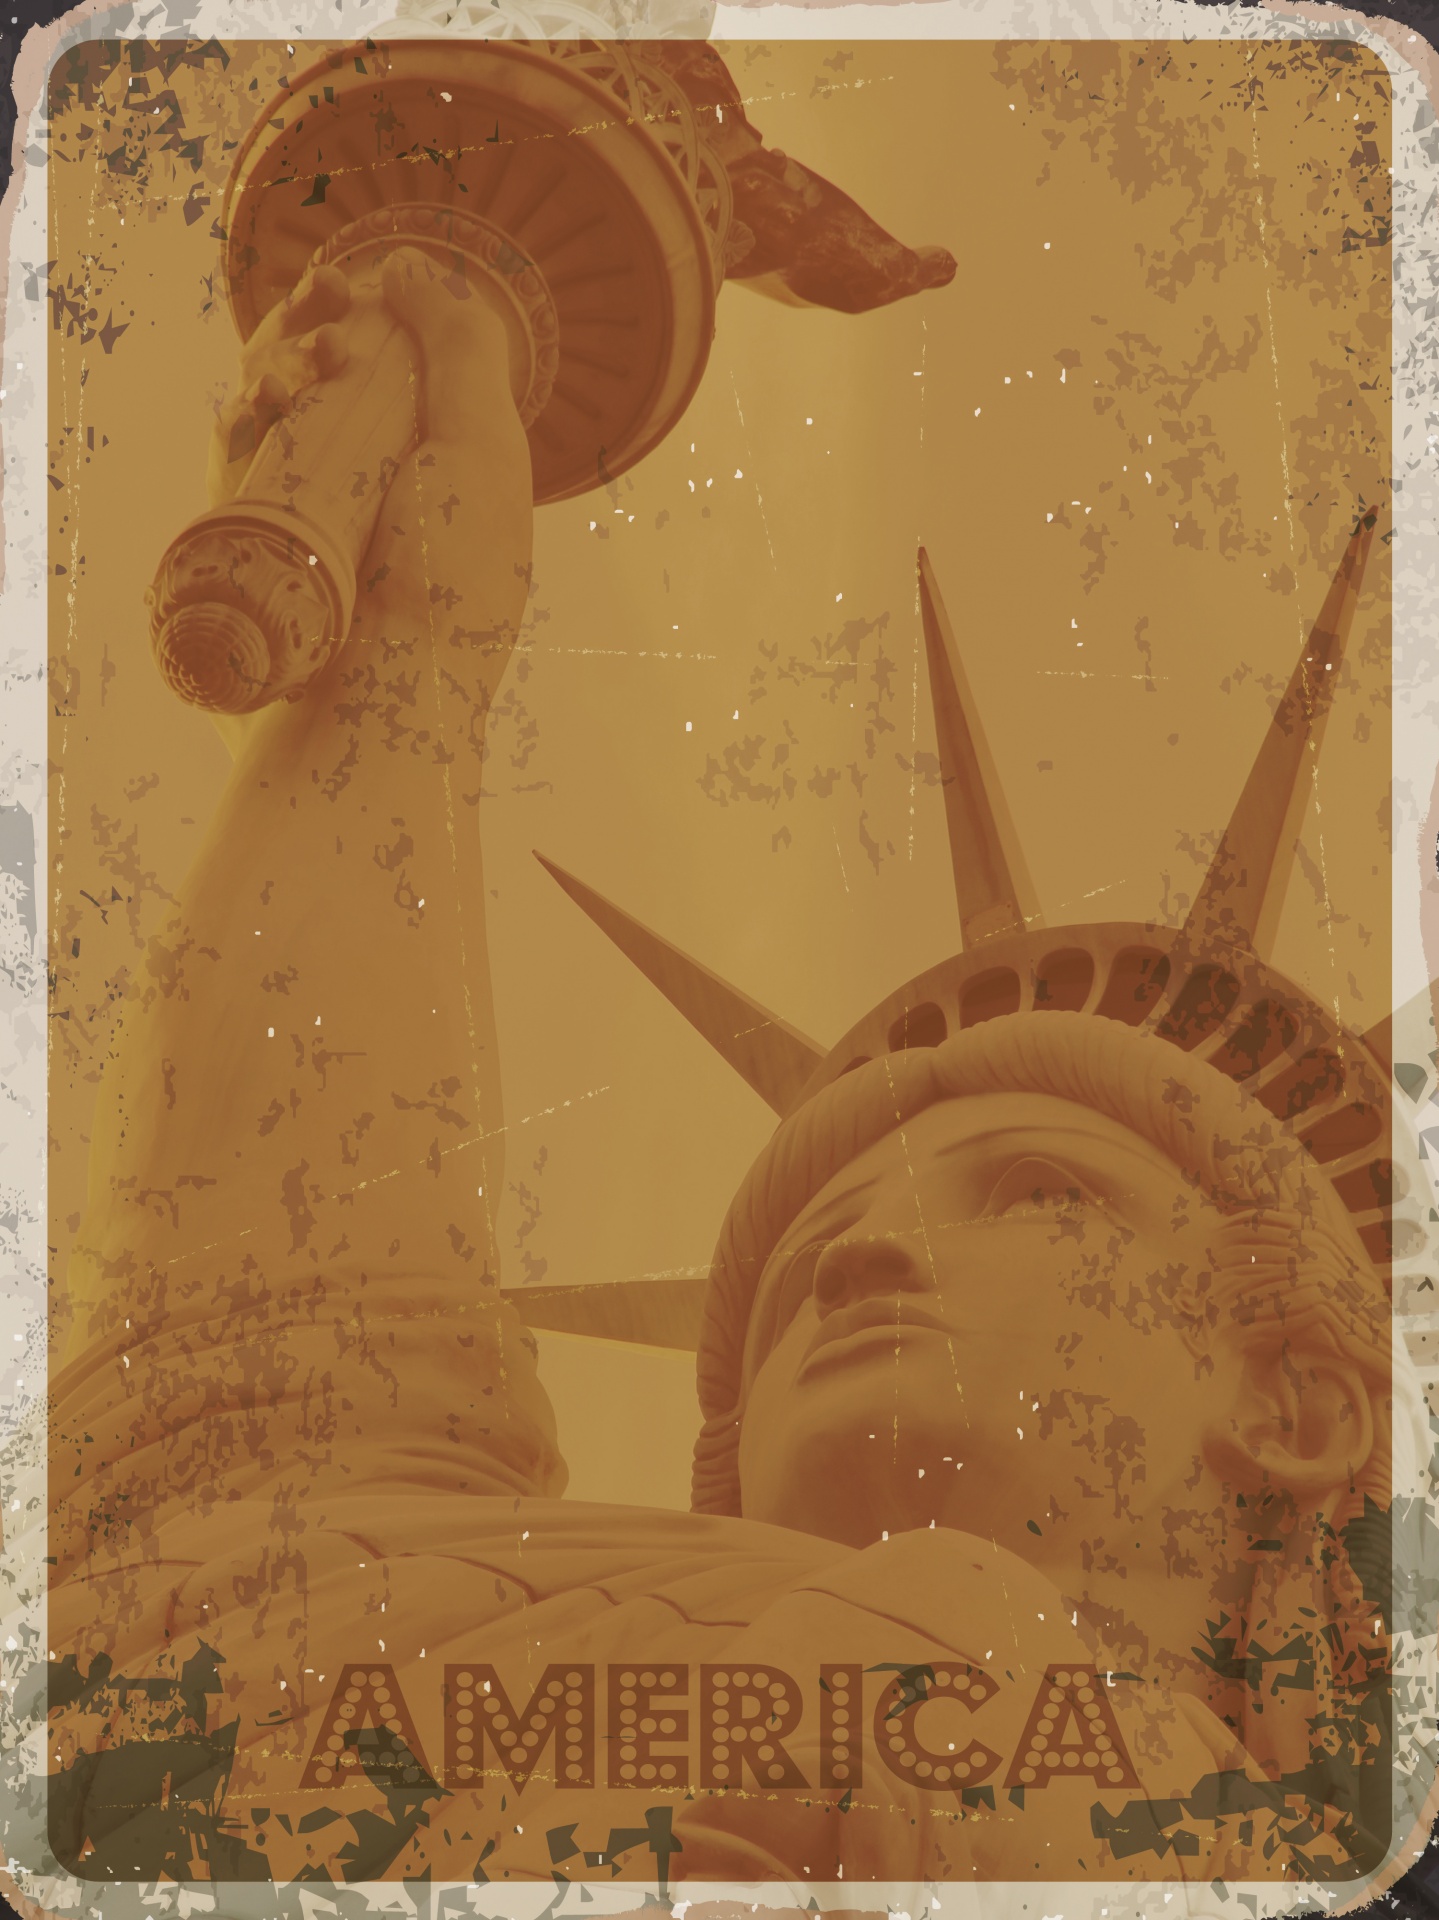 Grunge poster, vintage metal sign of the statue of liberty and text America